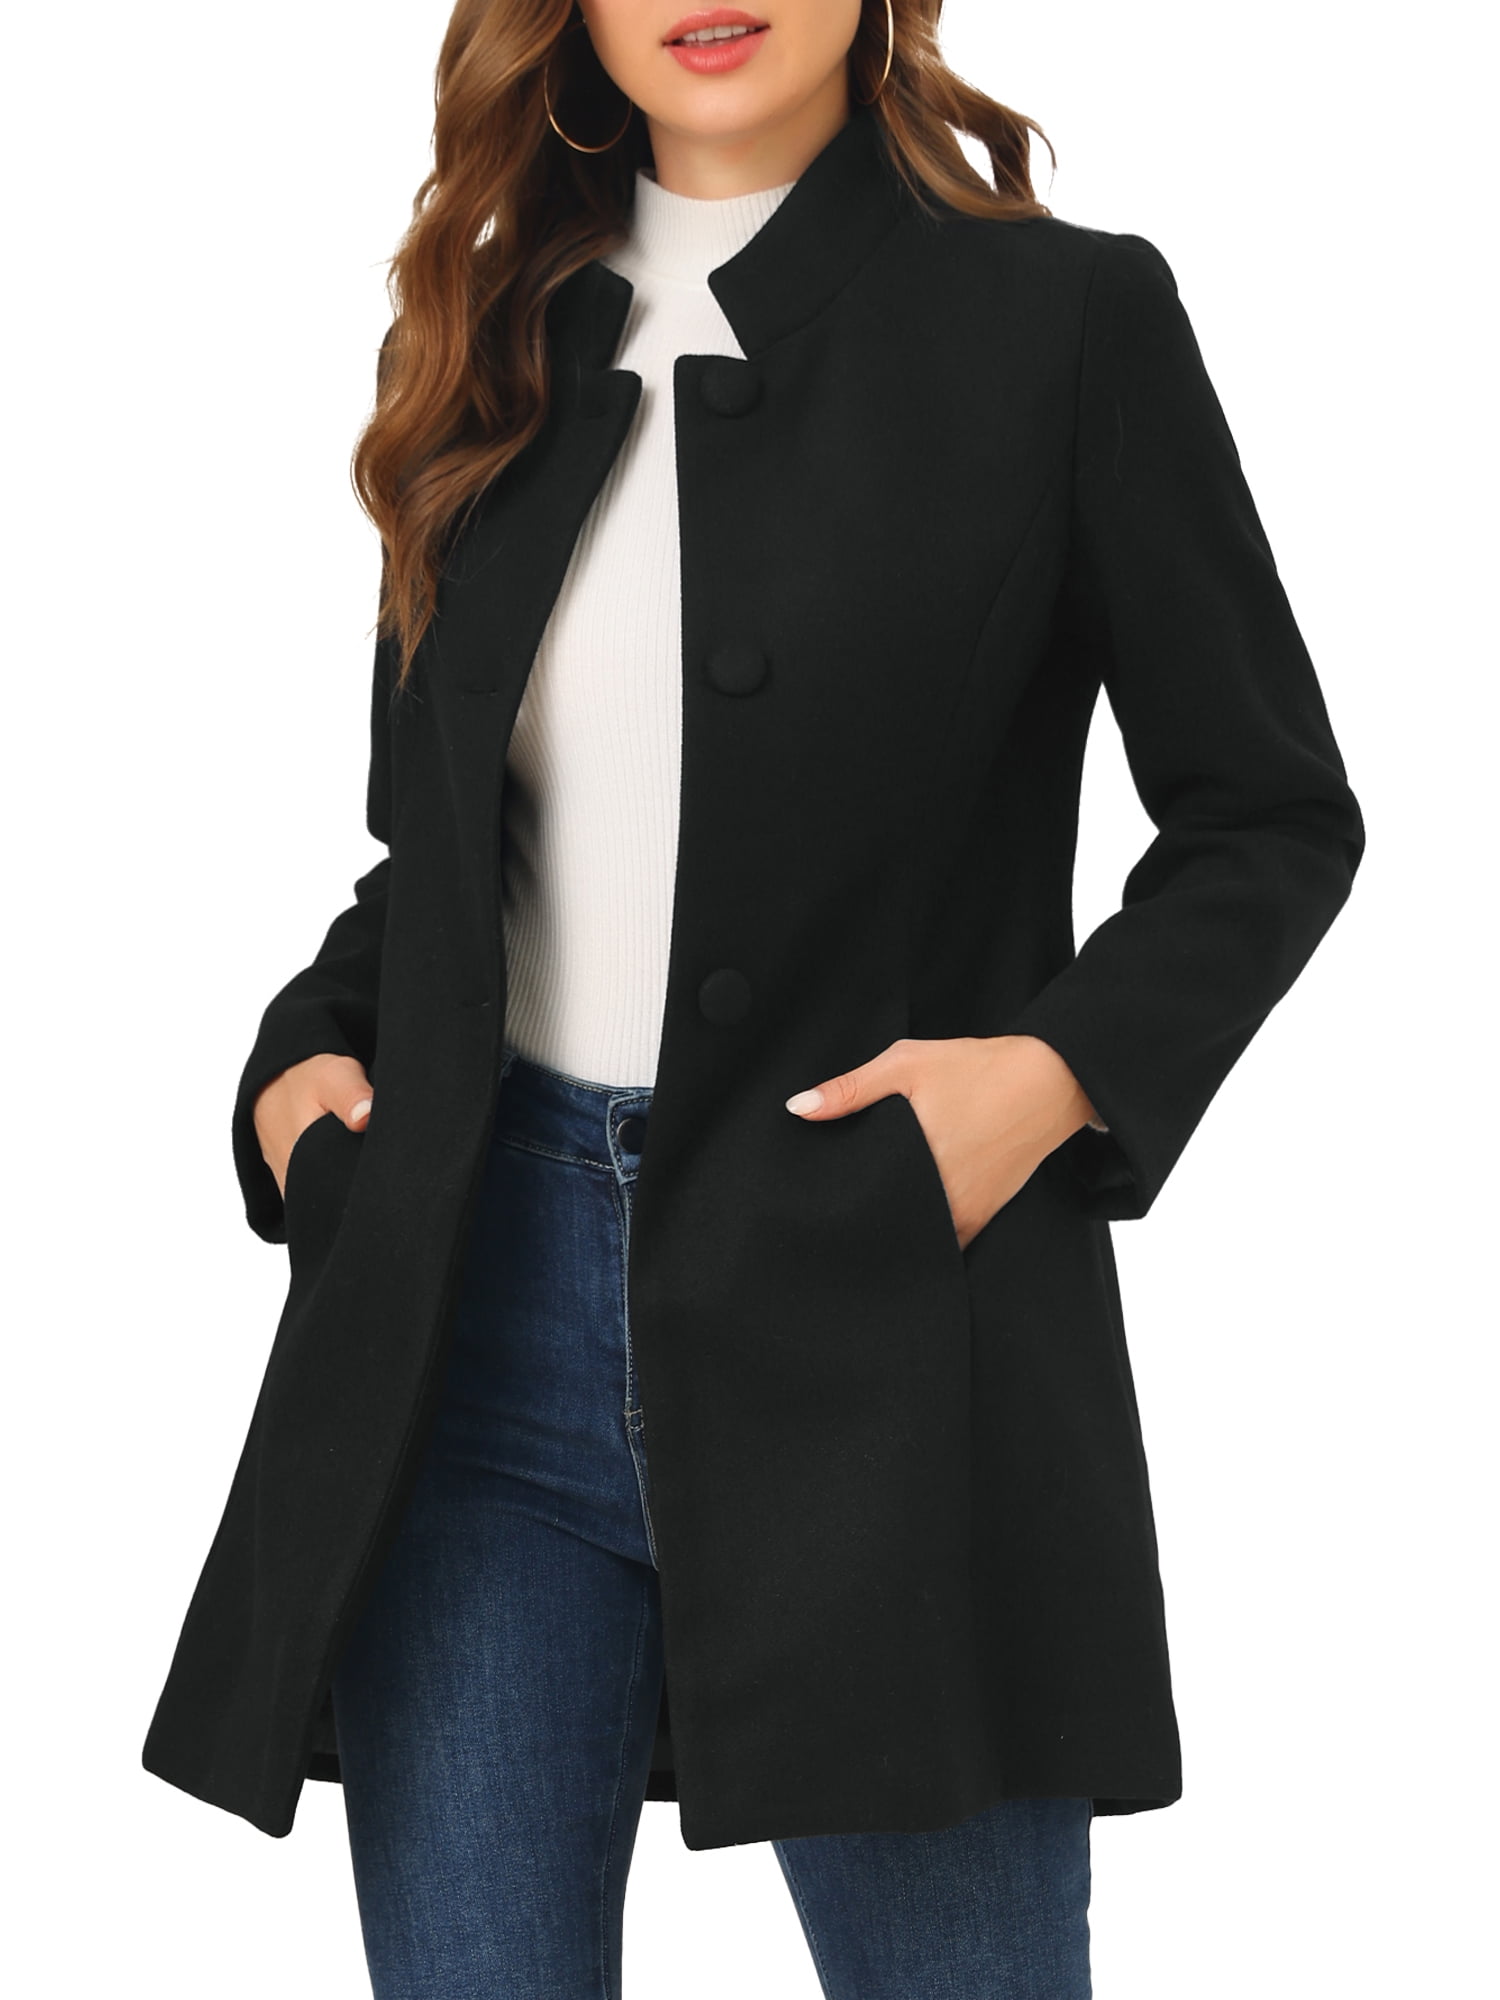 YSJZBS Winter Coats For Women 2023 Trendy,top black of friday deals,cheap  corset,1 cent items only,best christmas gifts,black mini skirt prime at   Women's Coats Shop